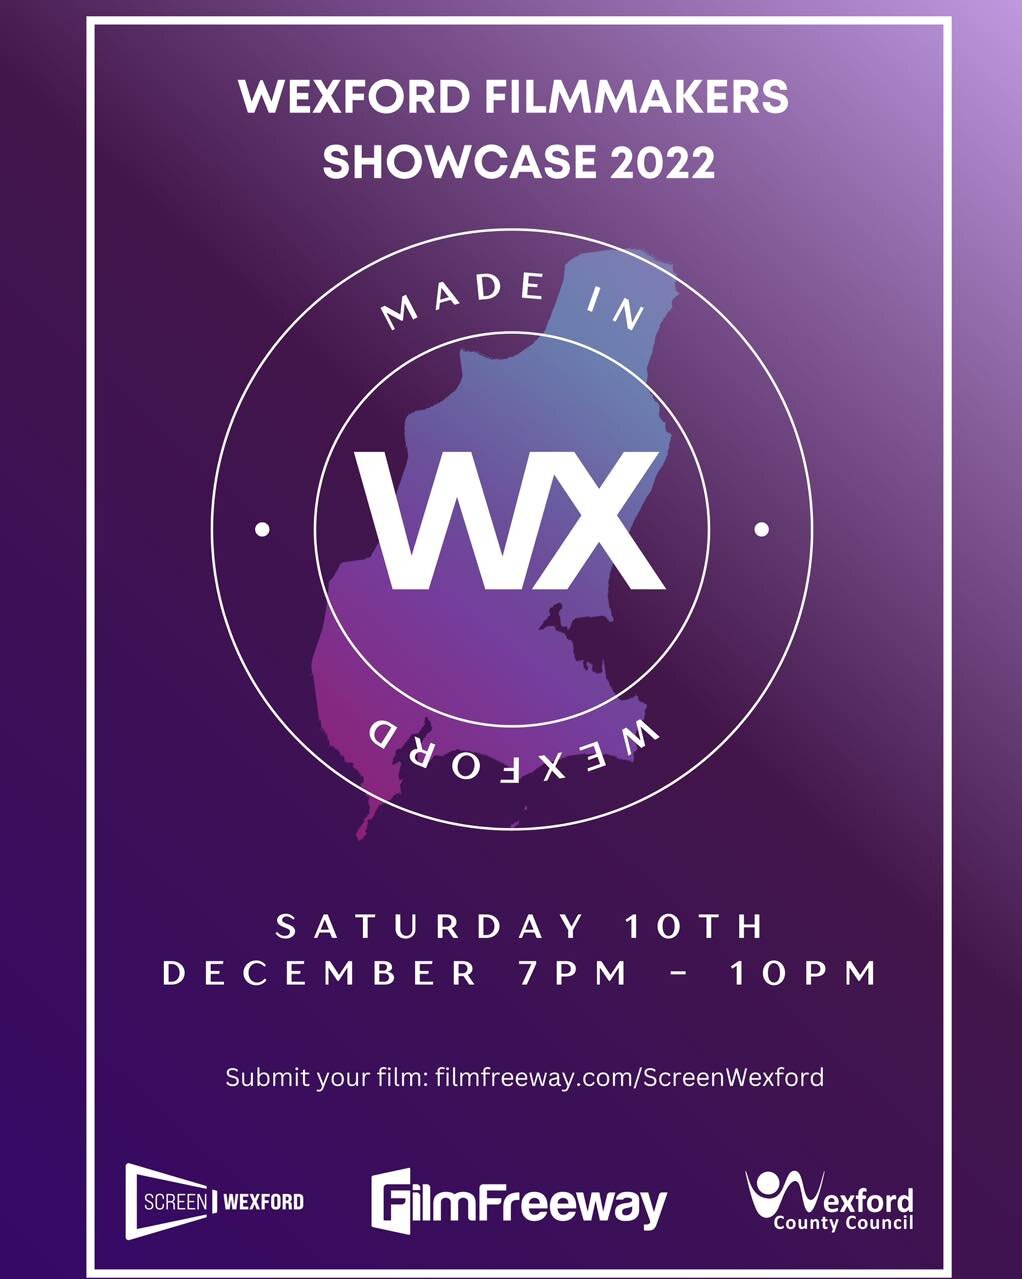 Made in WX is the Screen Wexford filmmaker showcase

Saturday 10th December 2022

Venue 1: Programme 1
The Bailey, Enniscorthy 2pm - 5pm (free)

Networking:
The Bailey, Enniscorthy 5pm - 6pm (free)
Venue 2: Programme 2
Presentation Centre Enniscorthy